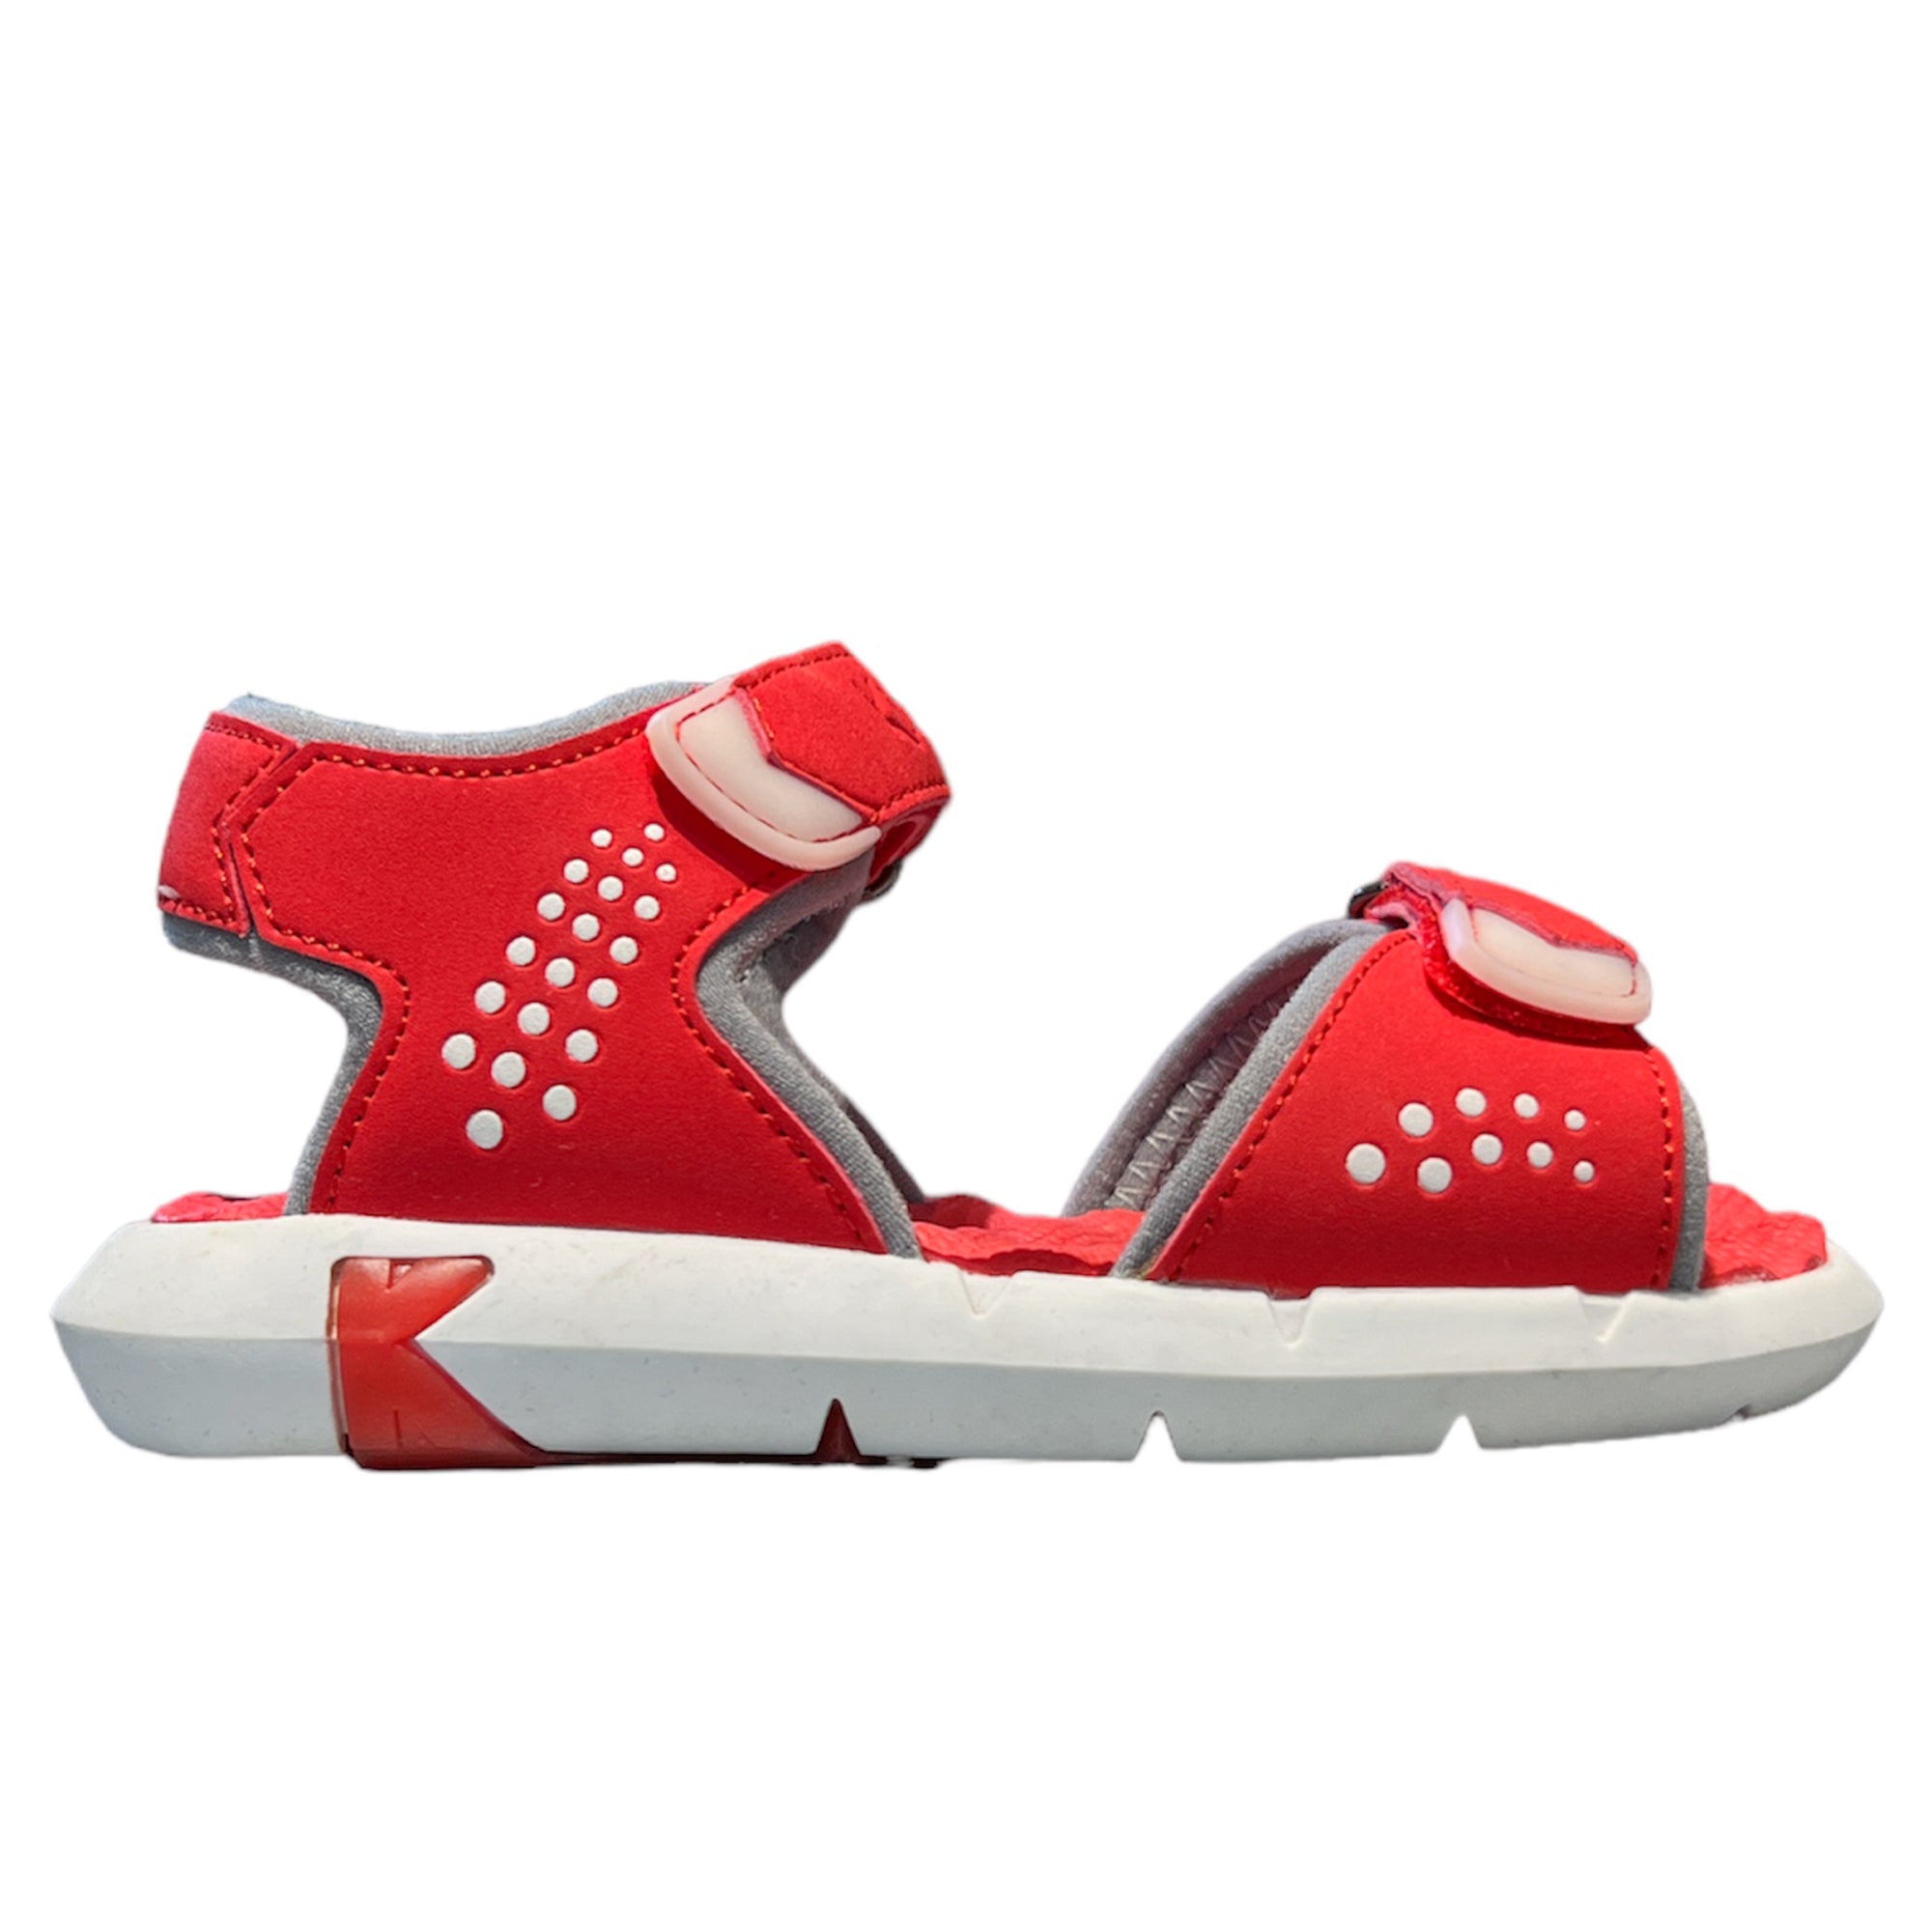 Kickers Red Sandals